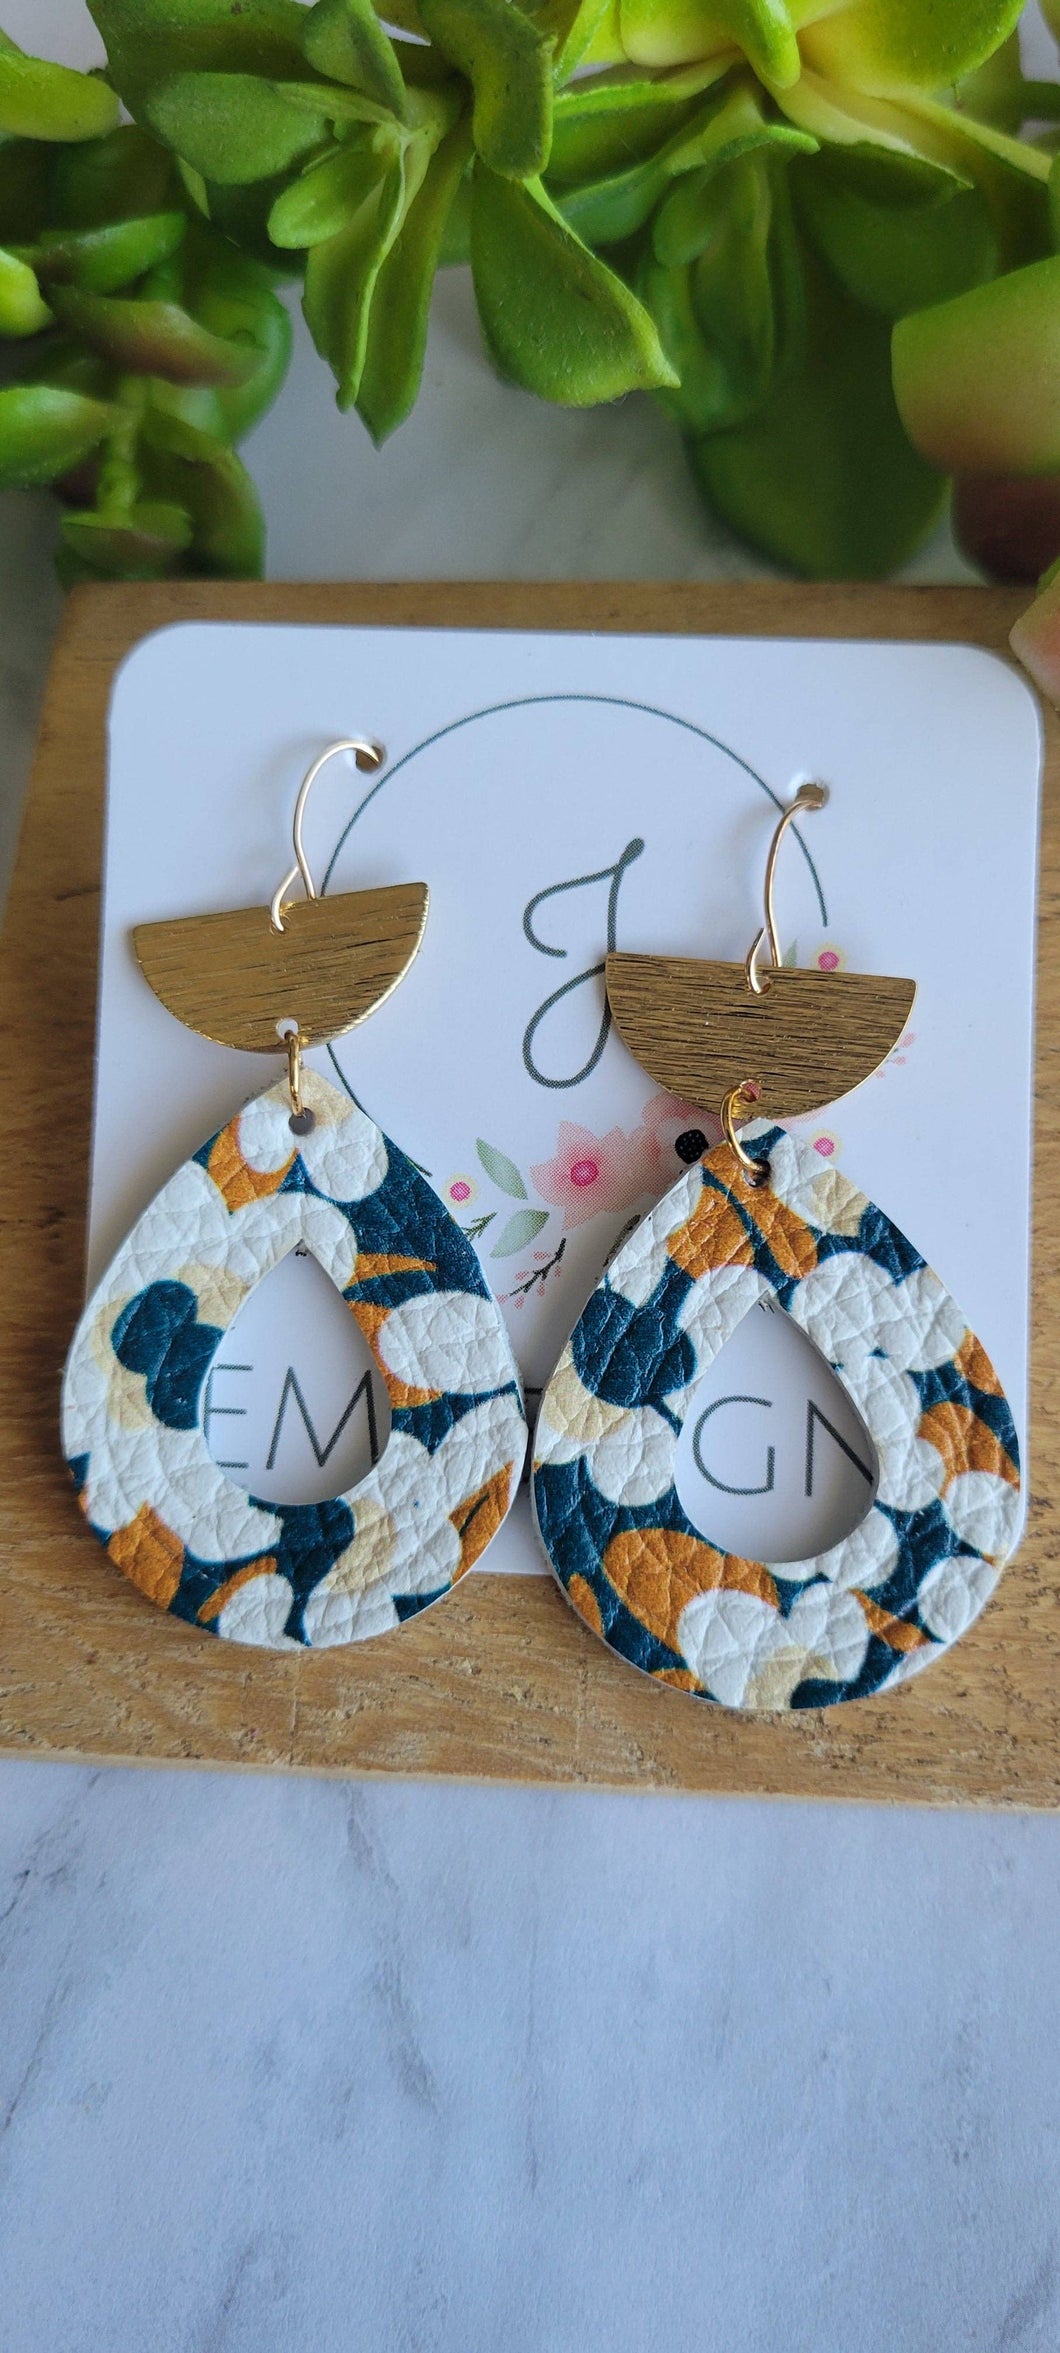 Leather and Gold Earrings